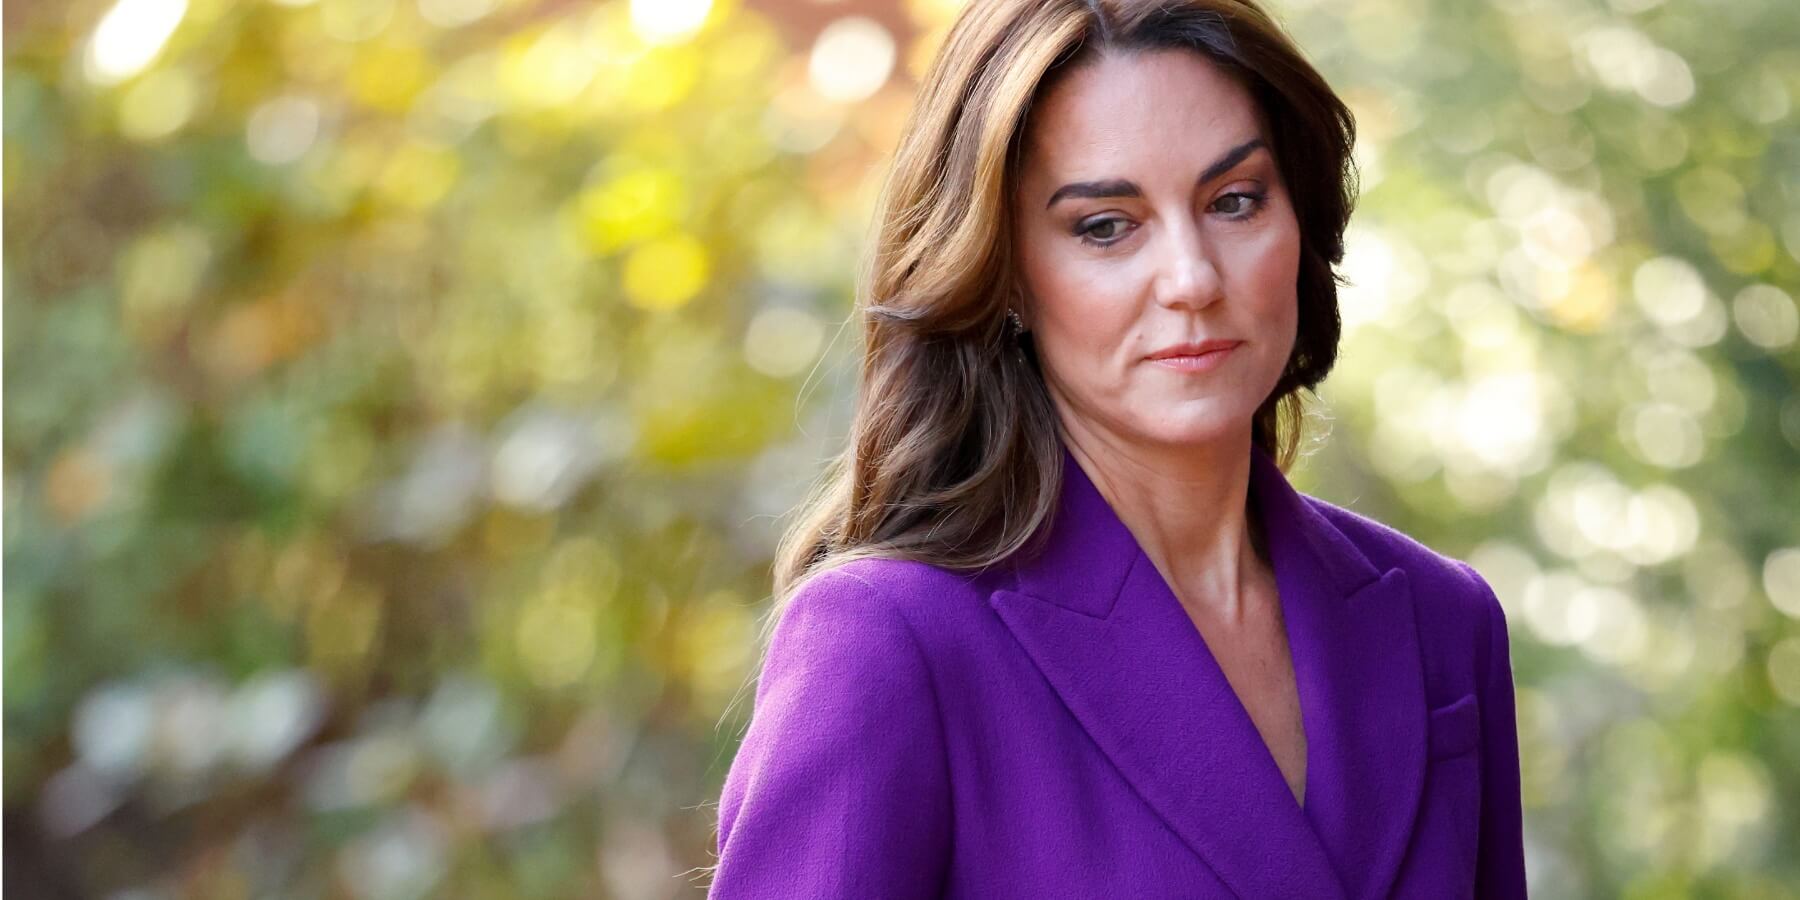 Kate Middleton is reportedly very ill claims a royal author.